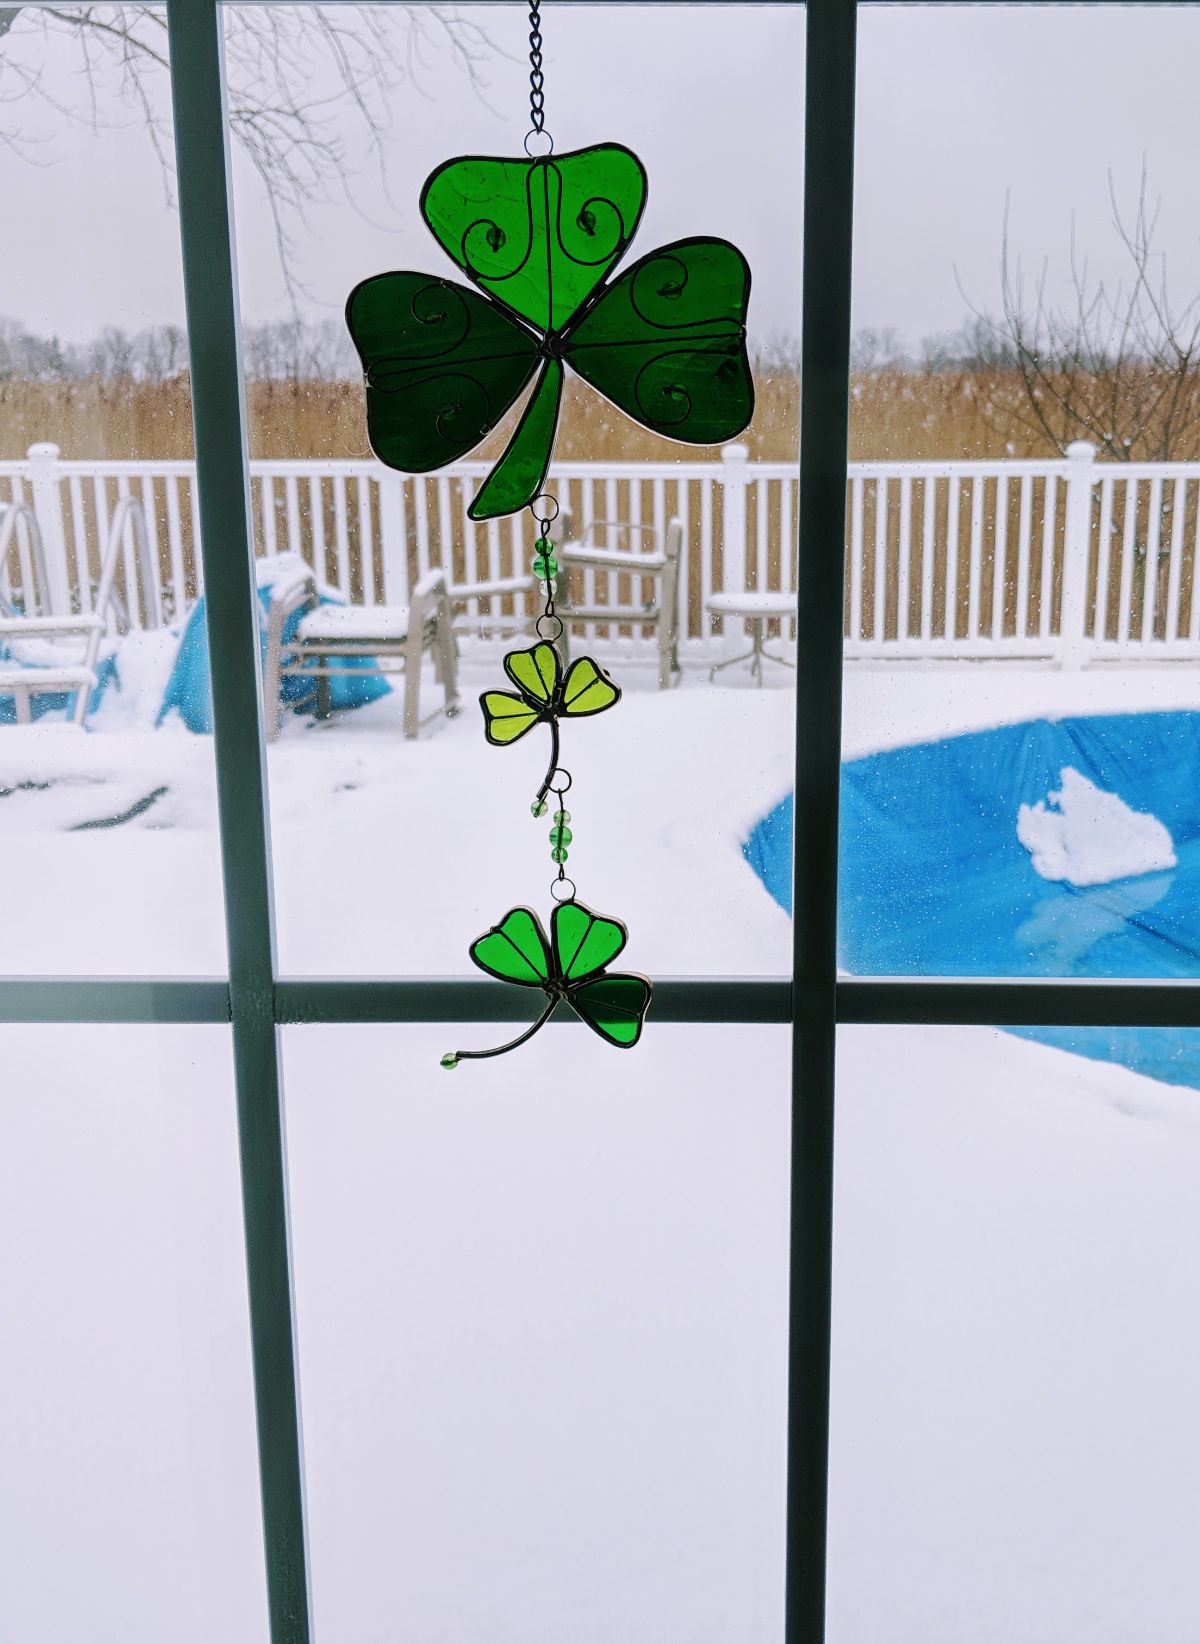 Shamrock suncatcher on glass door with snow on the deck around a pool in the background